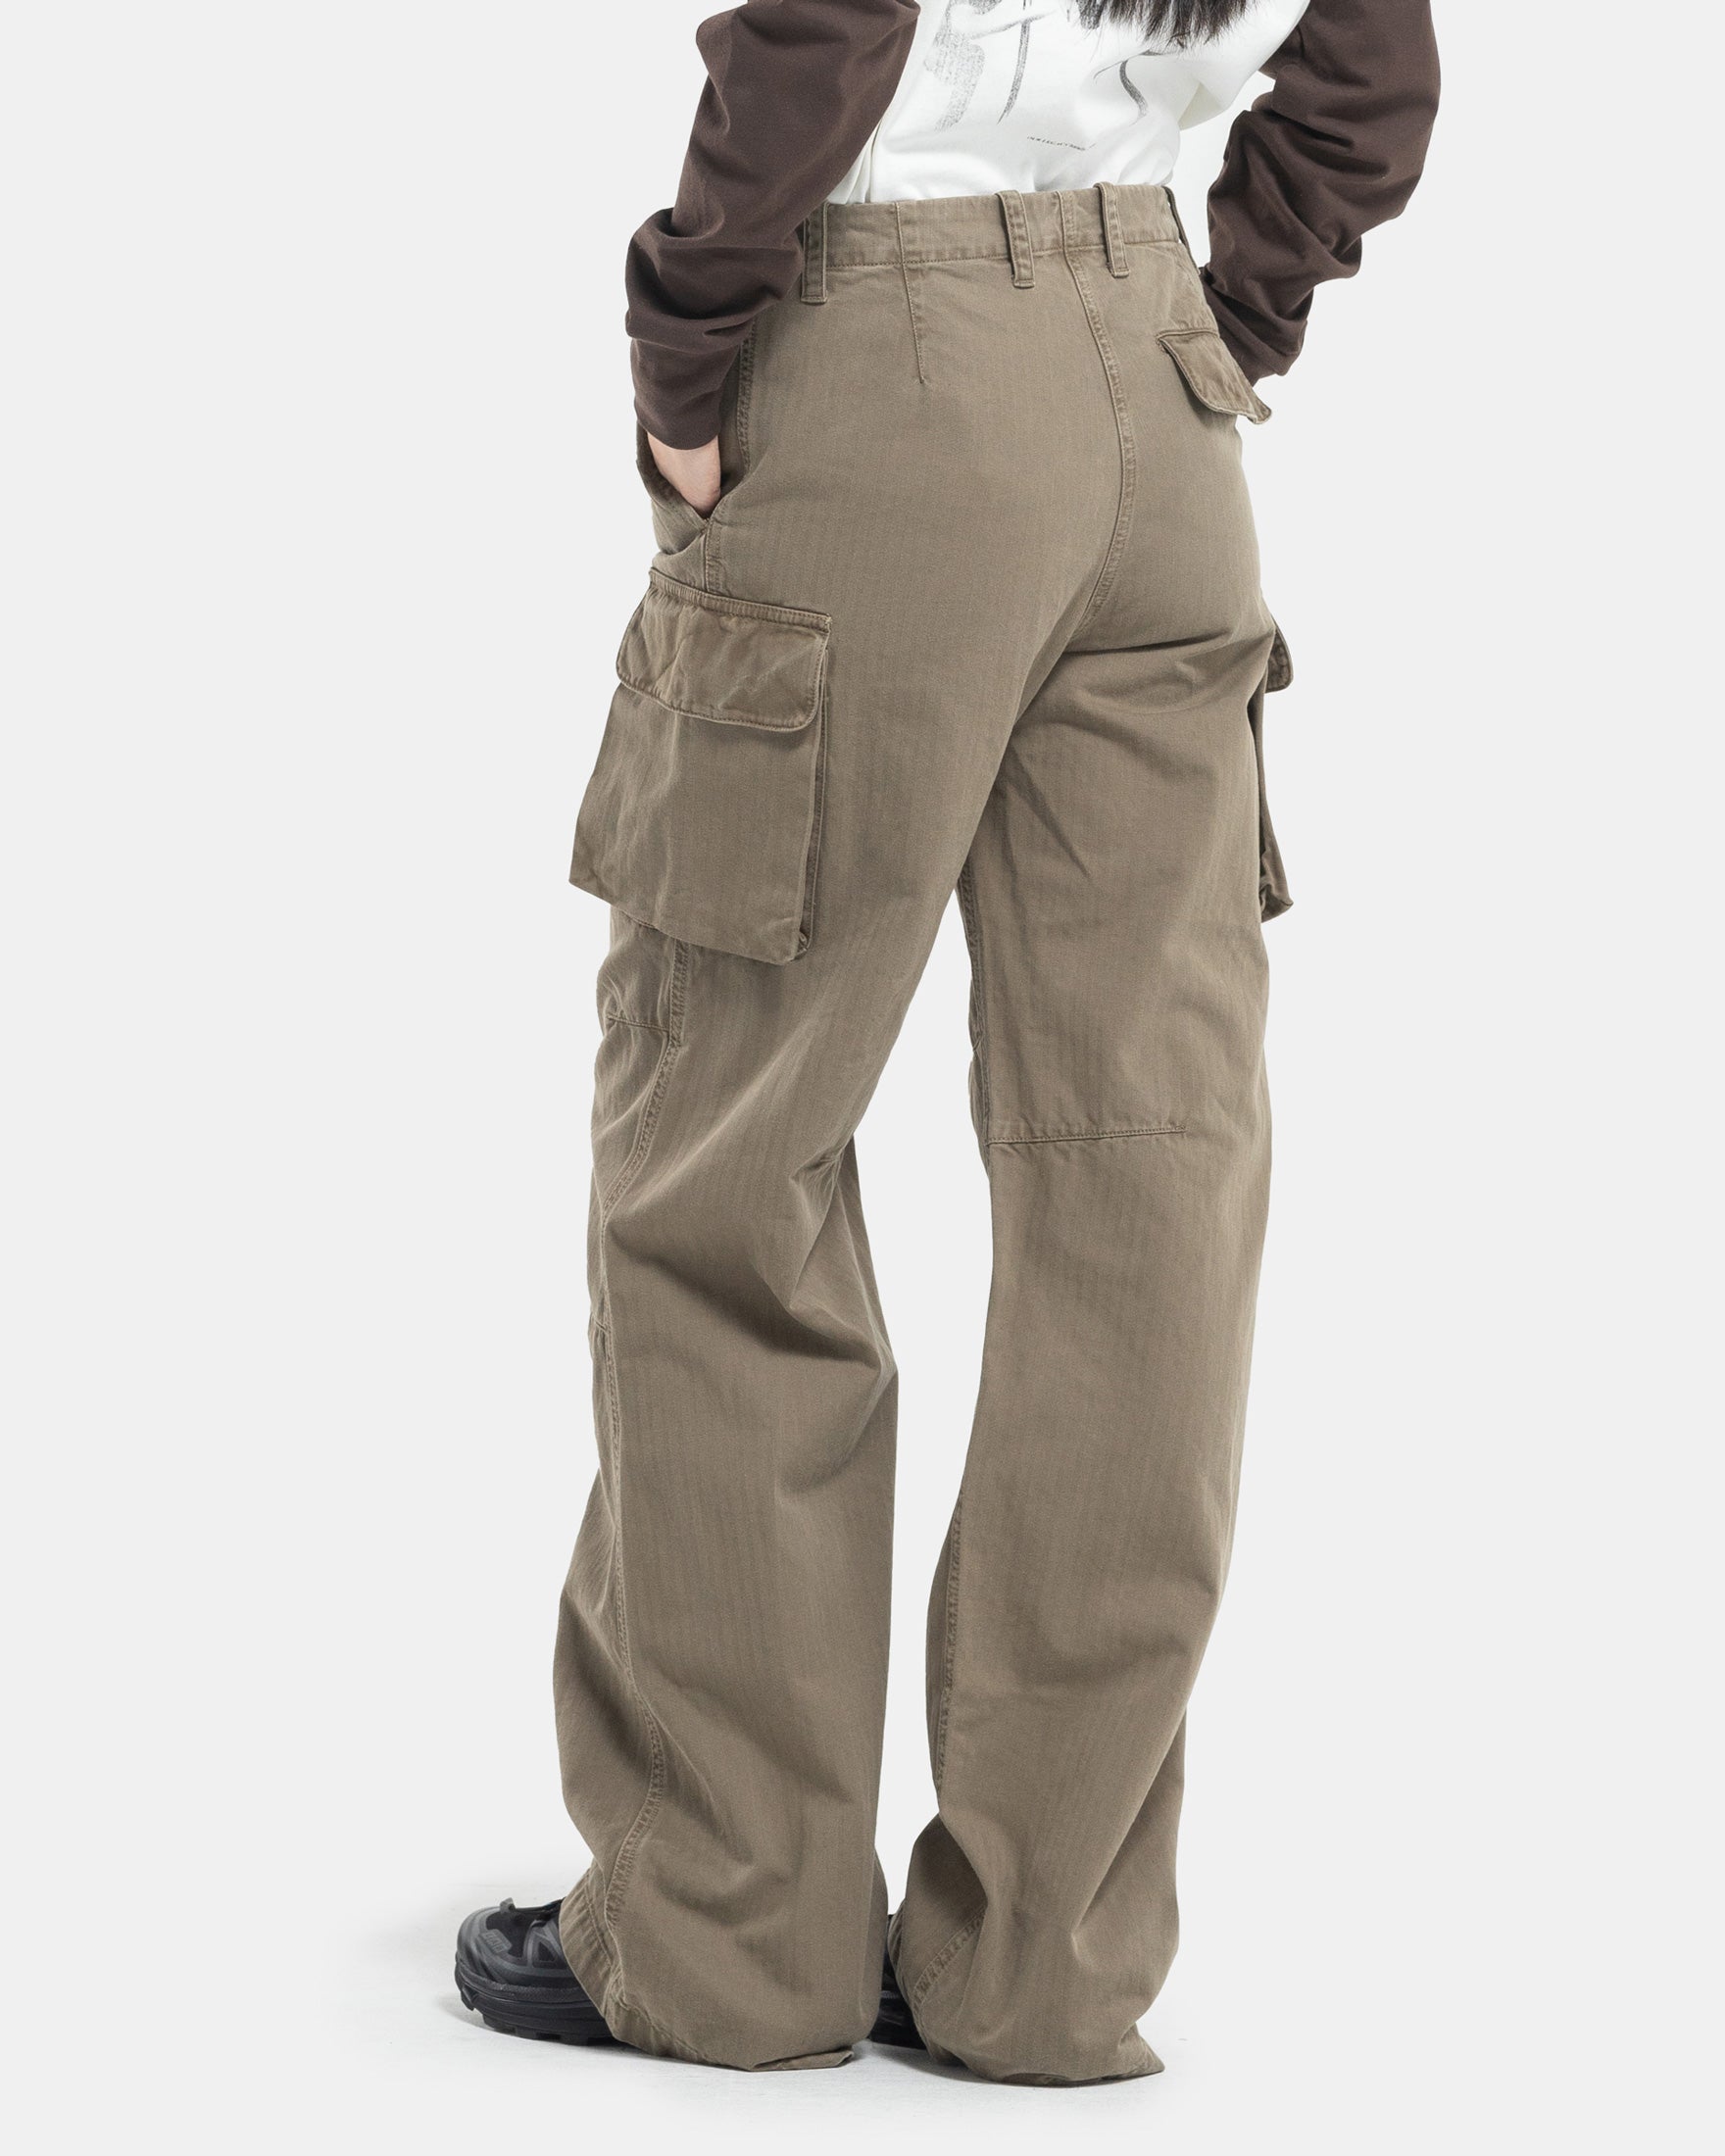 Khaki Cargo Pant from Our Legacy on white background